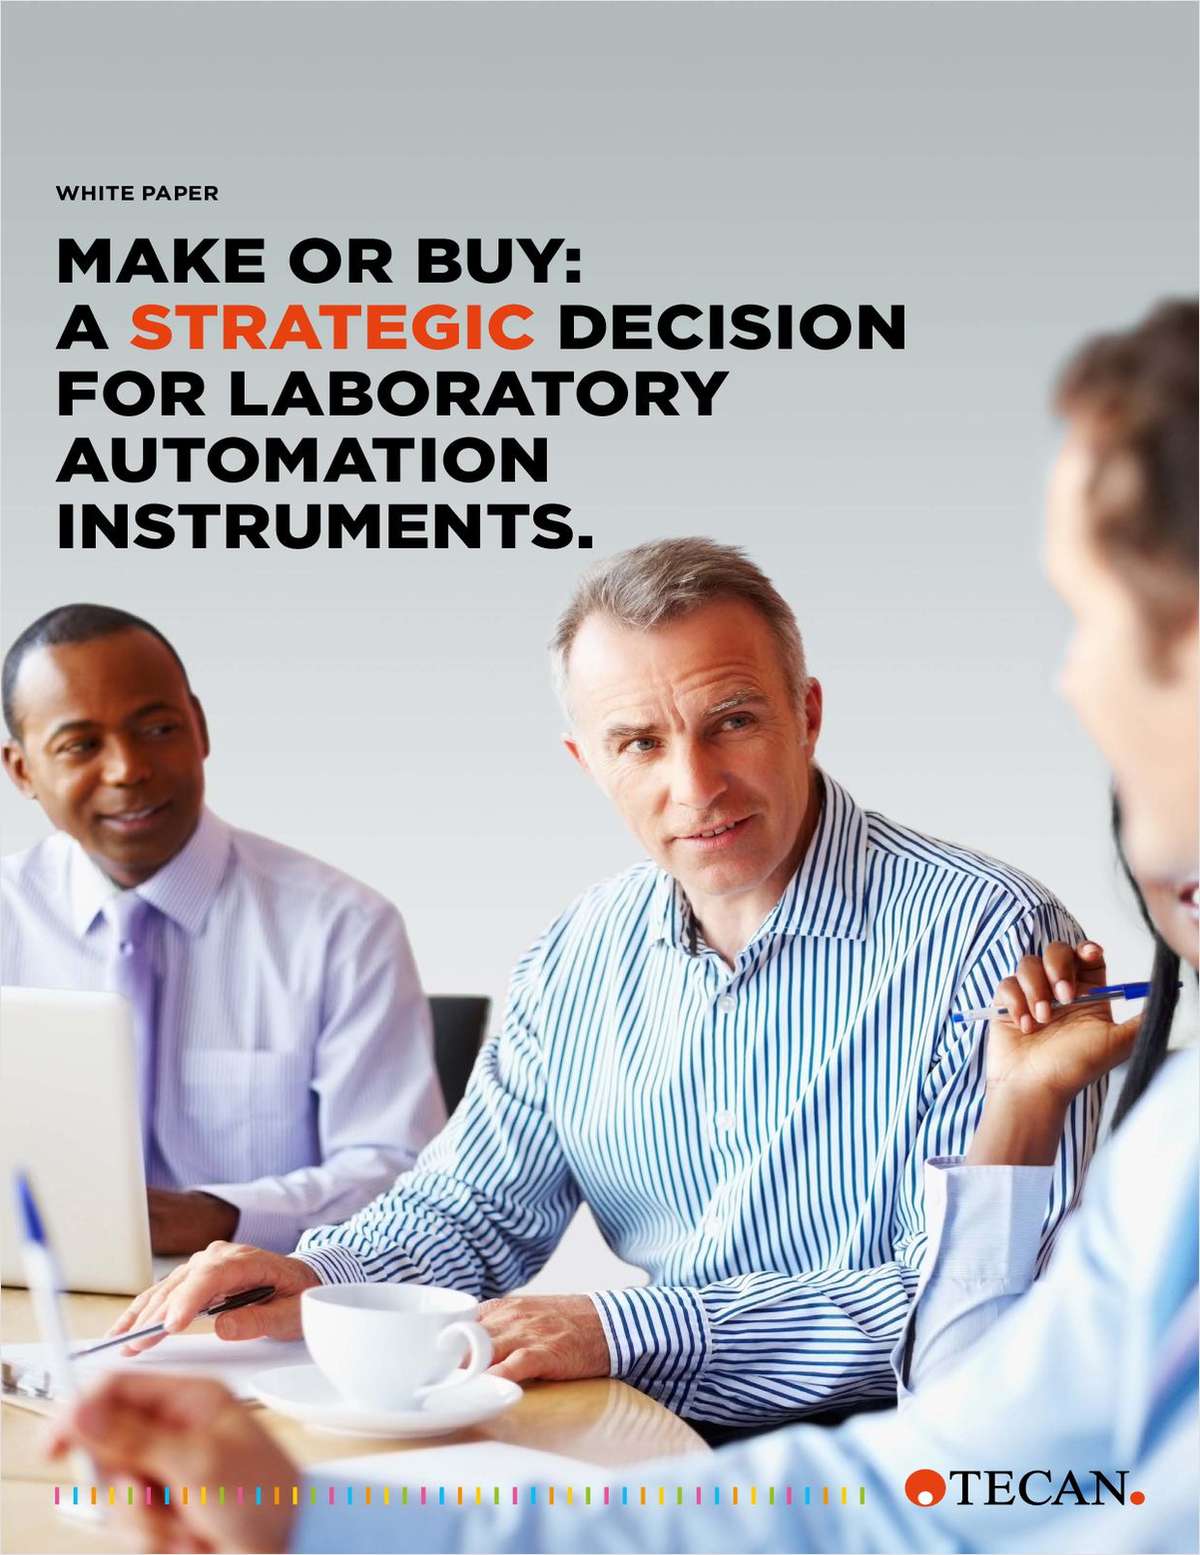 Make Or Buy: A Strategic Decision for Laboratory Automation Instruments